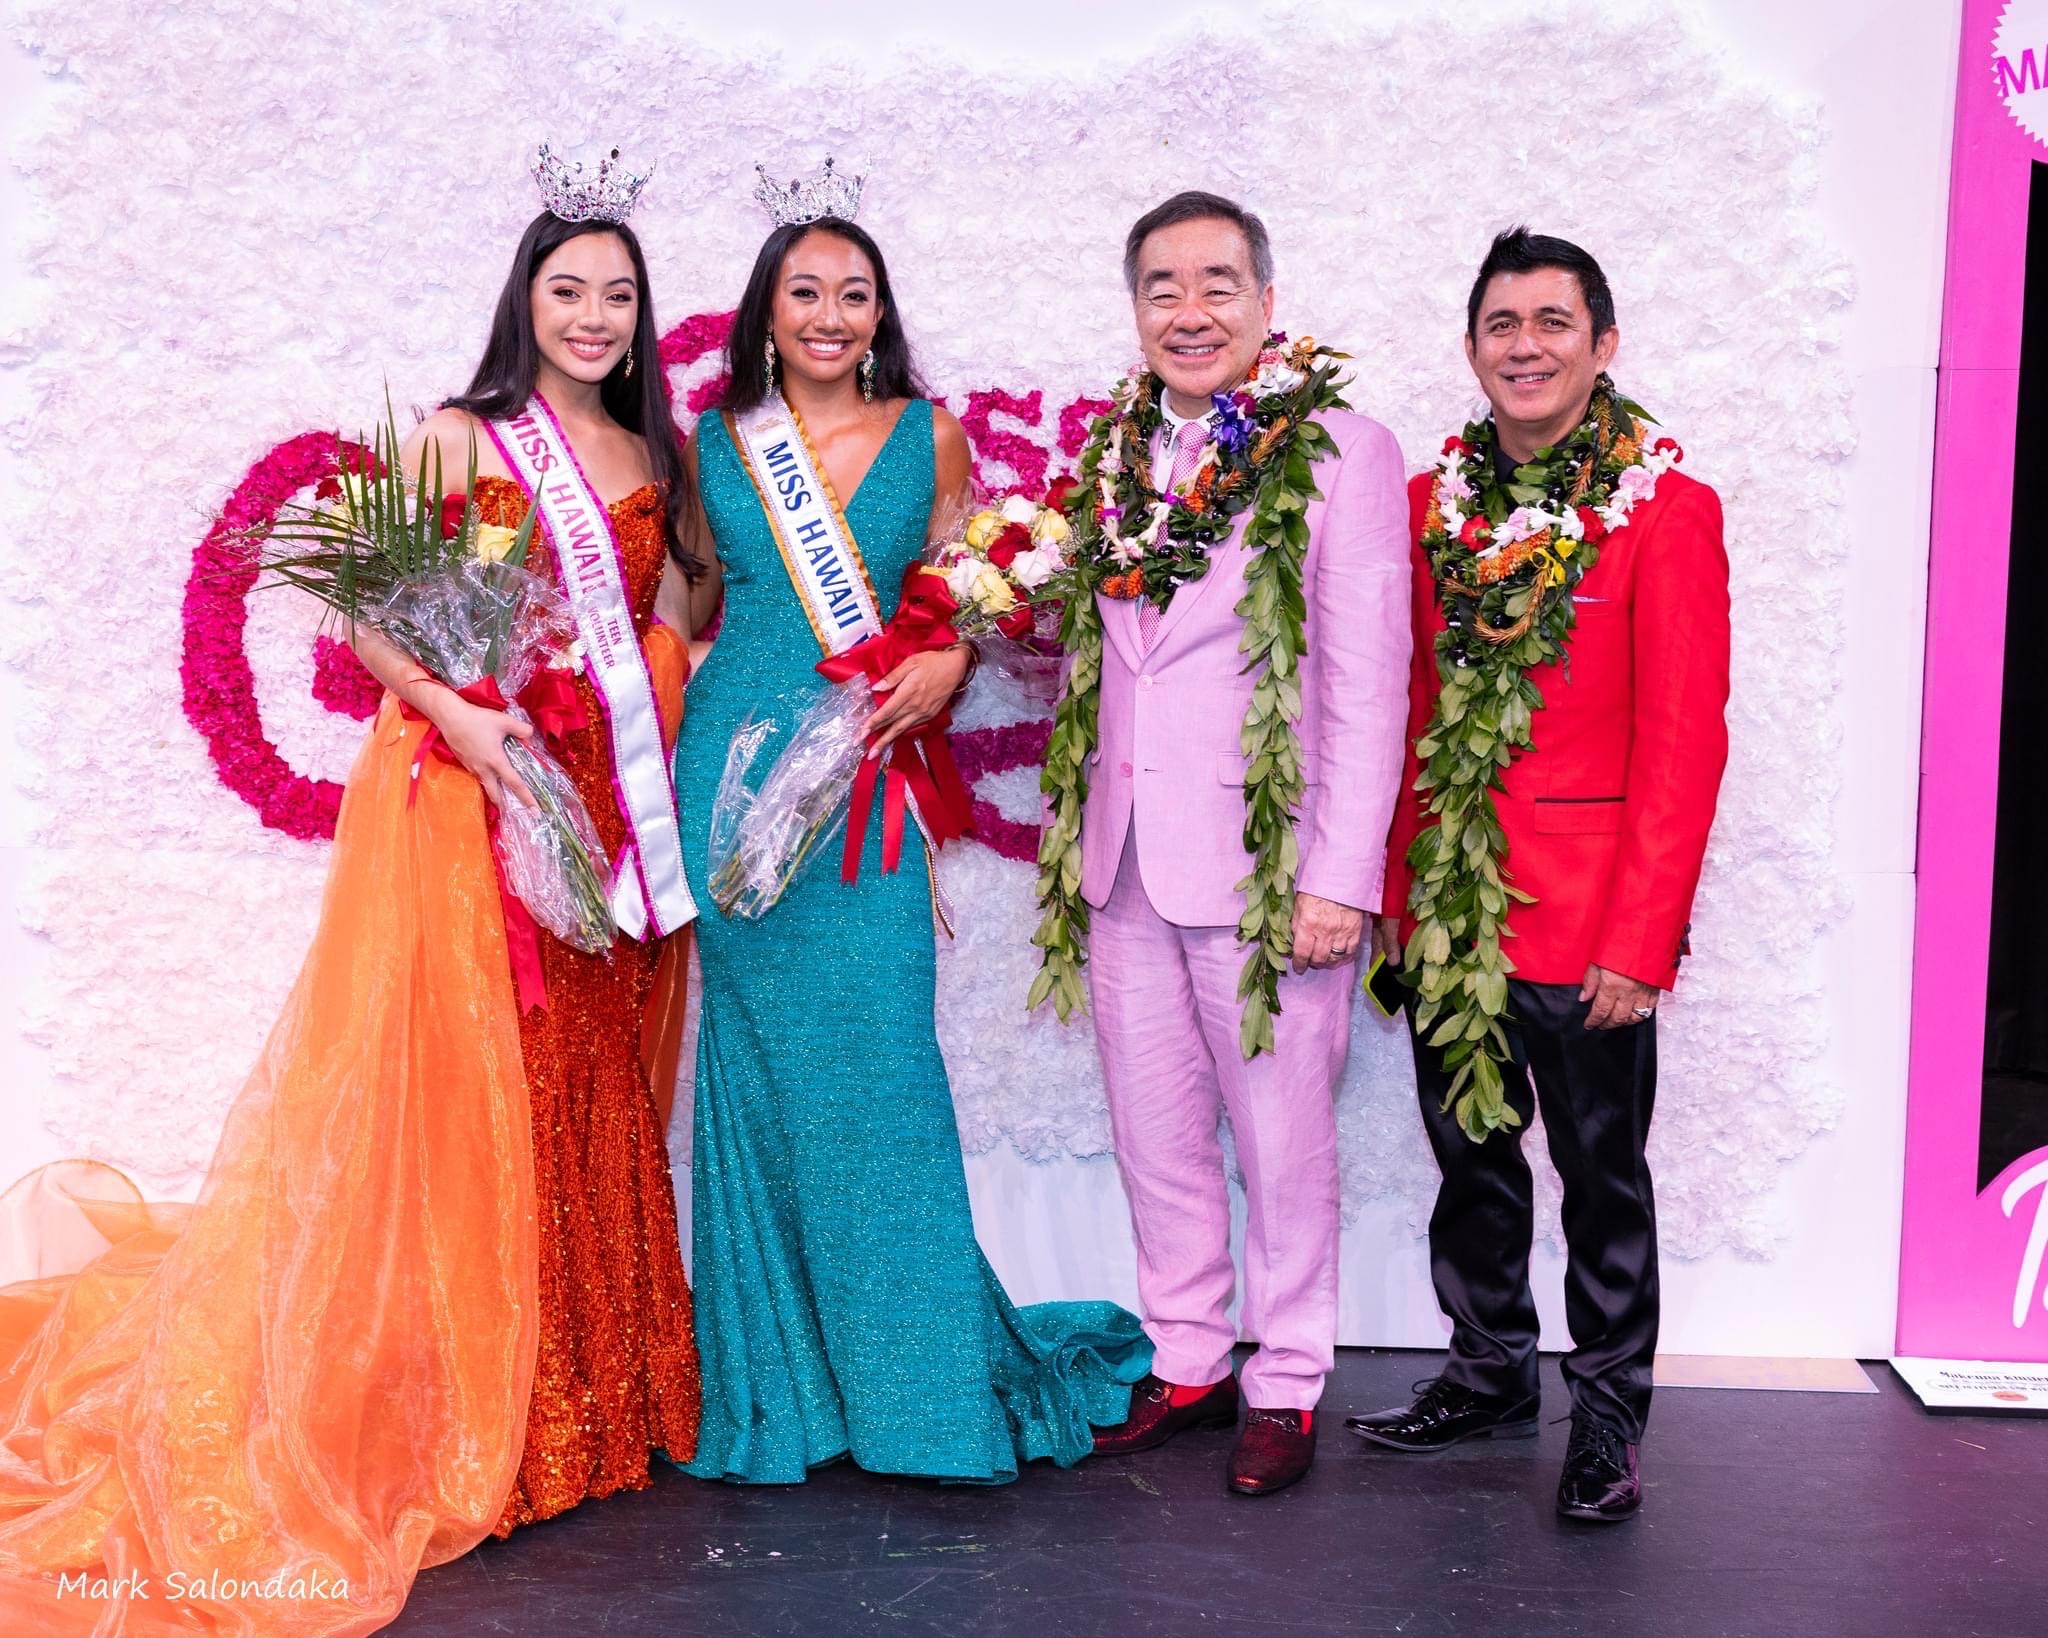 Two women and two men posing for a group photo. The women are wearing pageant gowns and crowns, and holding flowers.